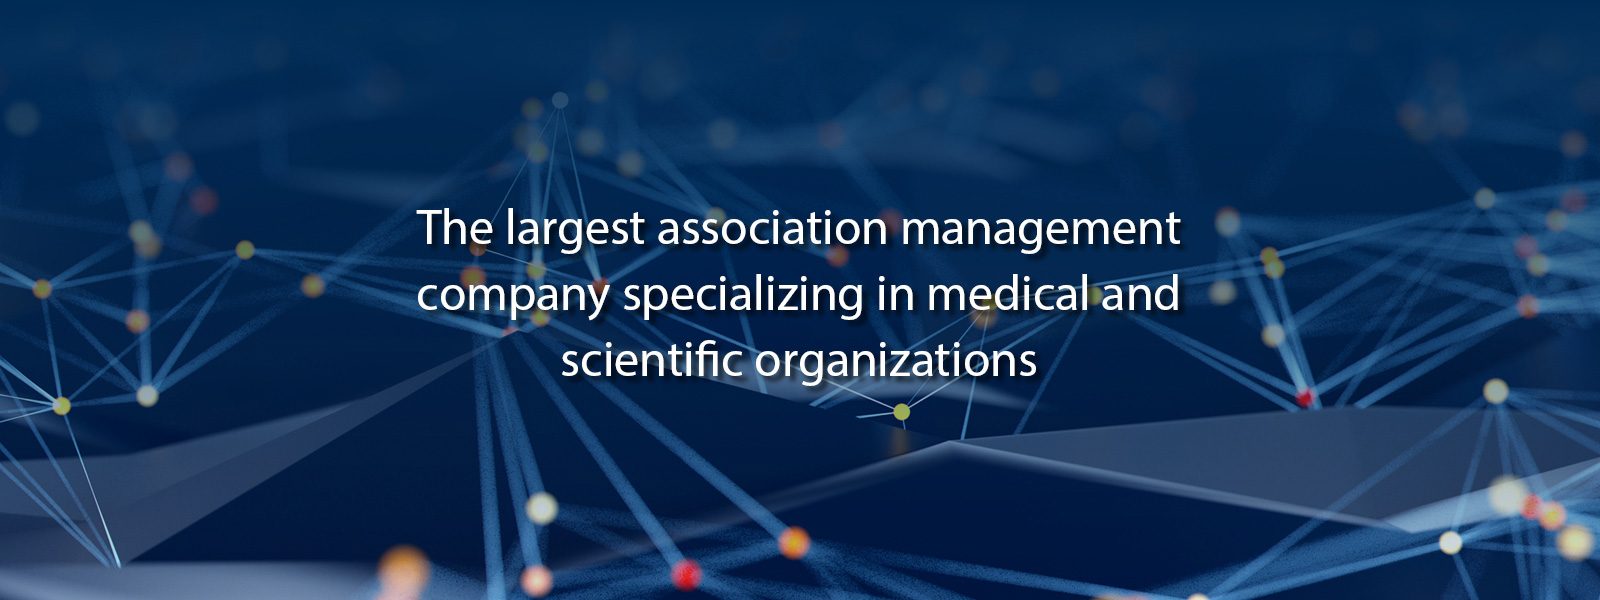 The largest association management company specializing in medical and scientific organizations